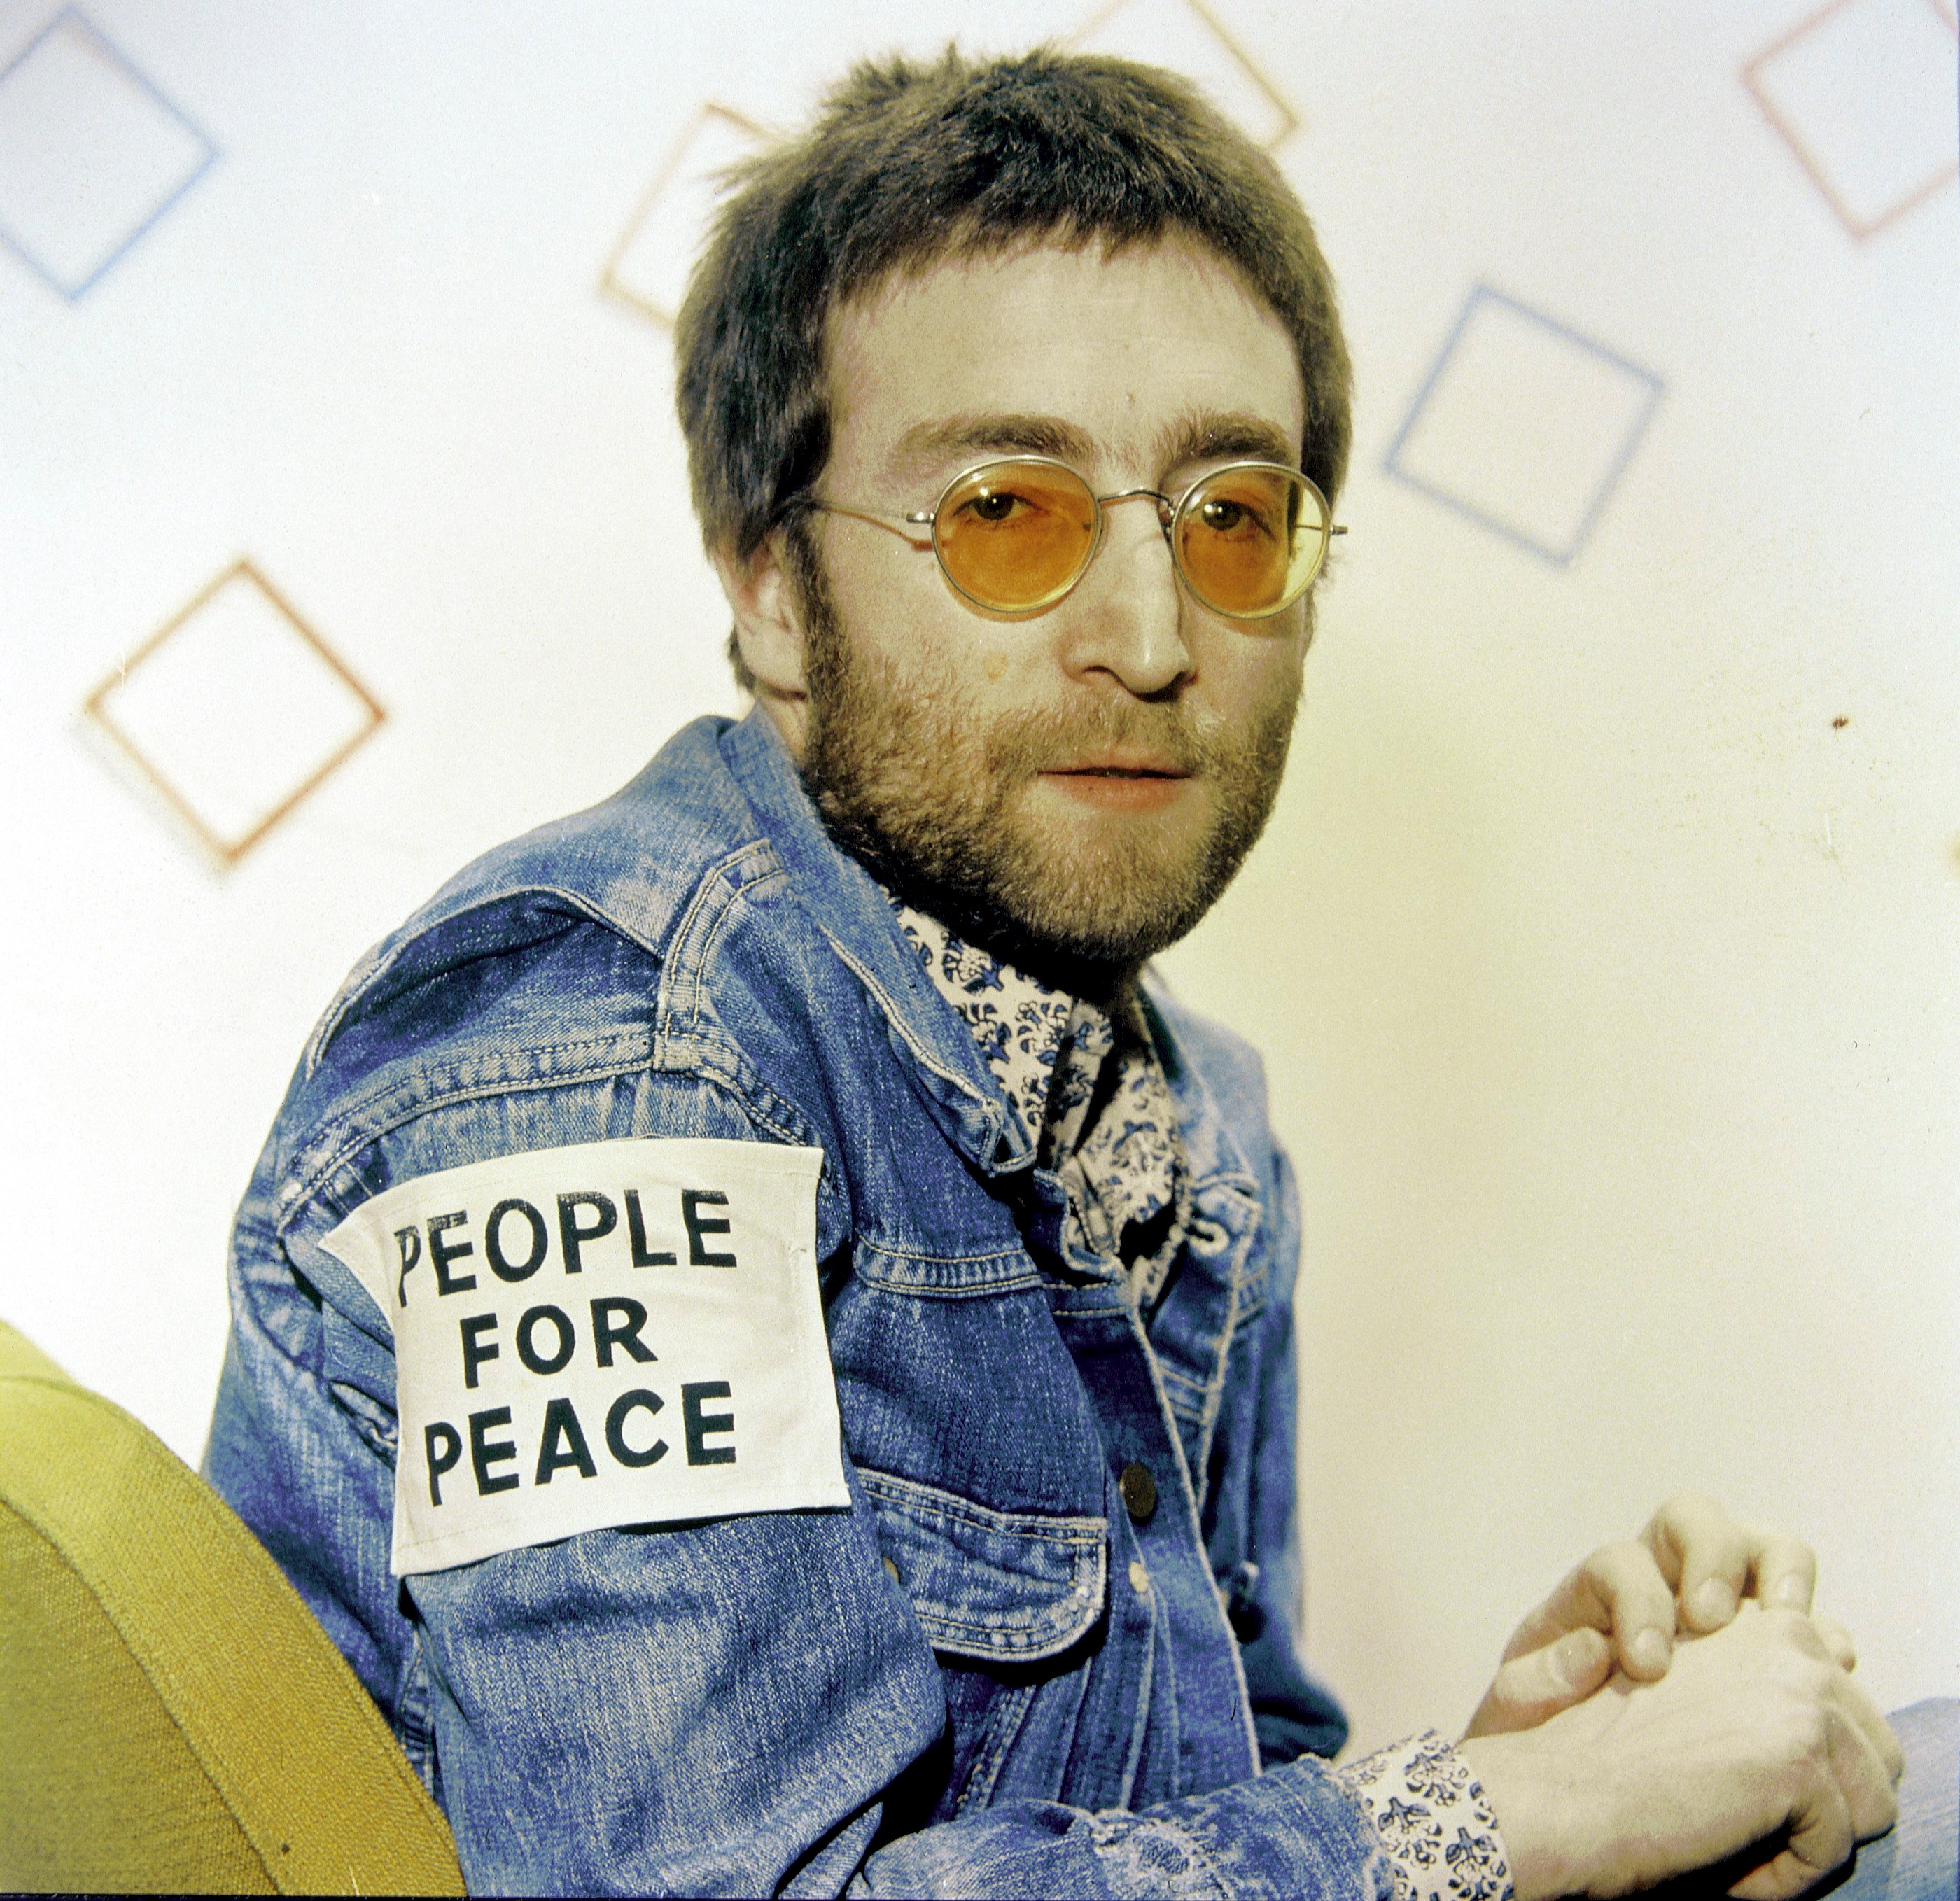 "Instant Karma!" singer John Lennon wearing a "People for Peace" patch